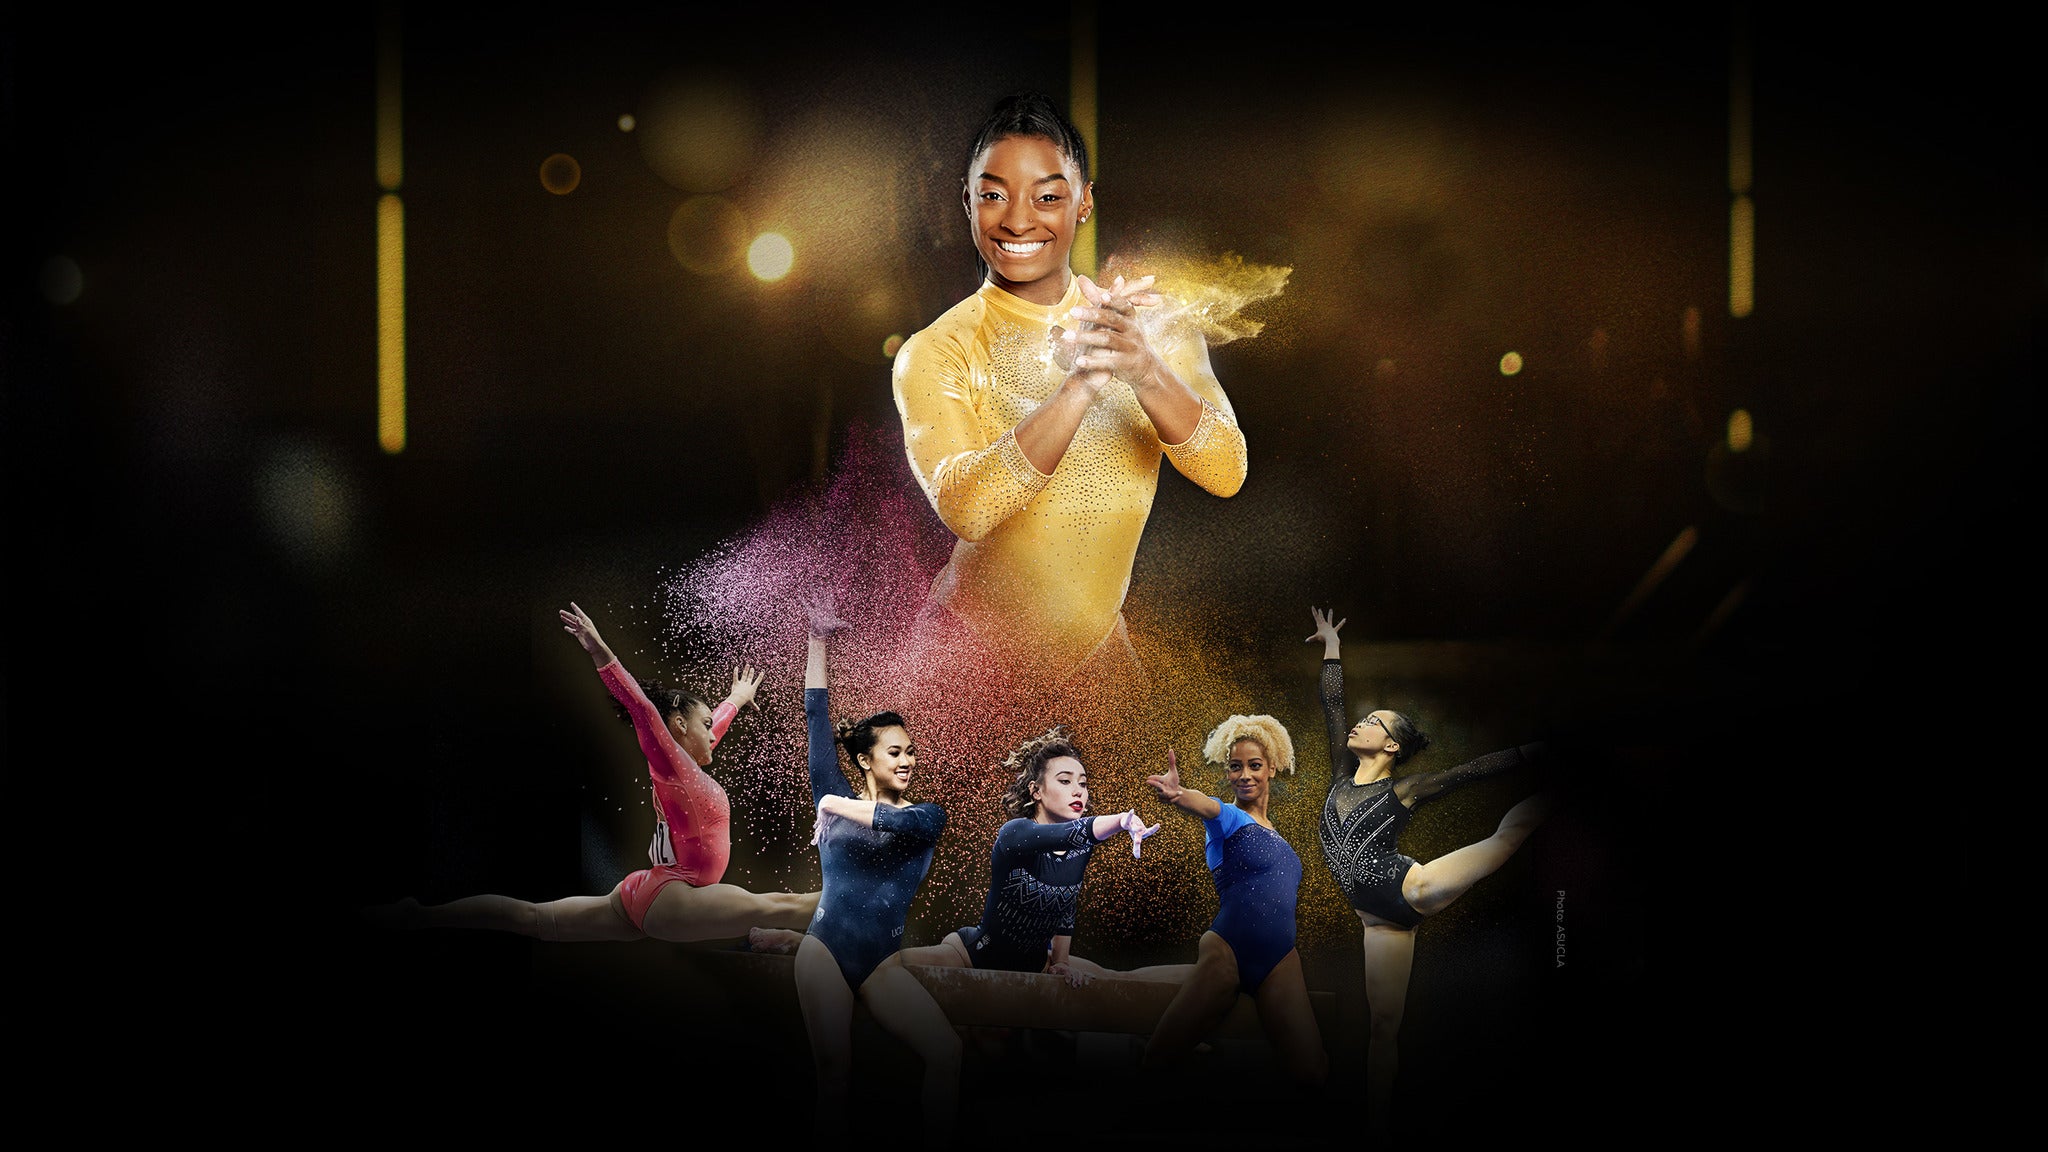 G.O.A.T. Gold Over America Tour Starring Simone Biles in North Little Rock promo photo for Ticketmaster presale offer code